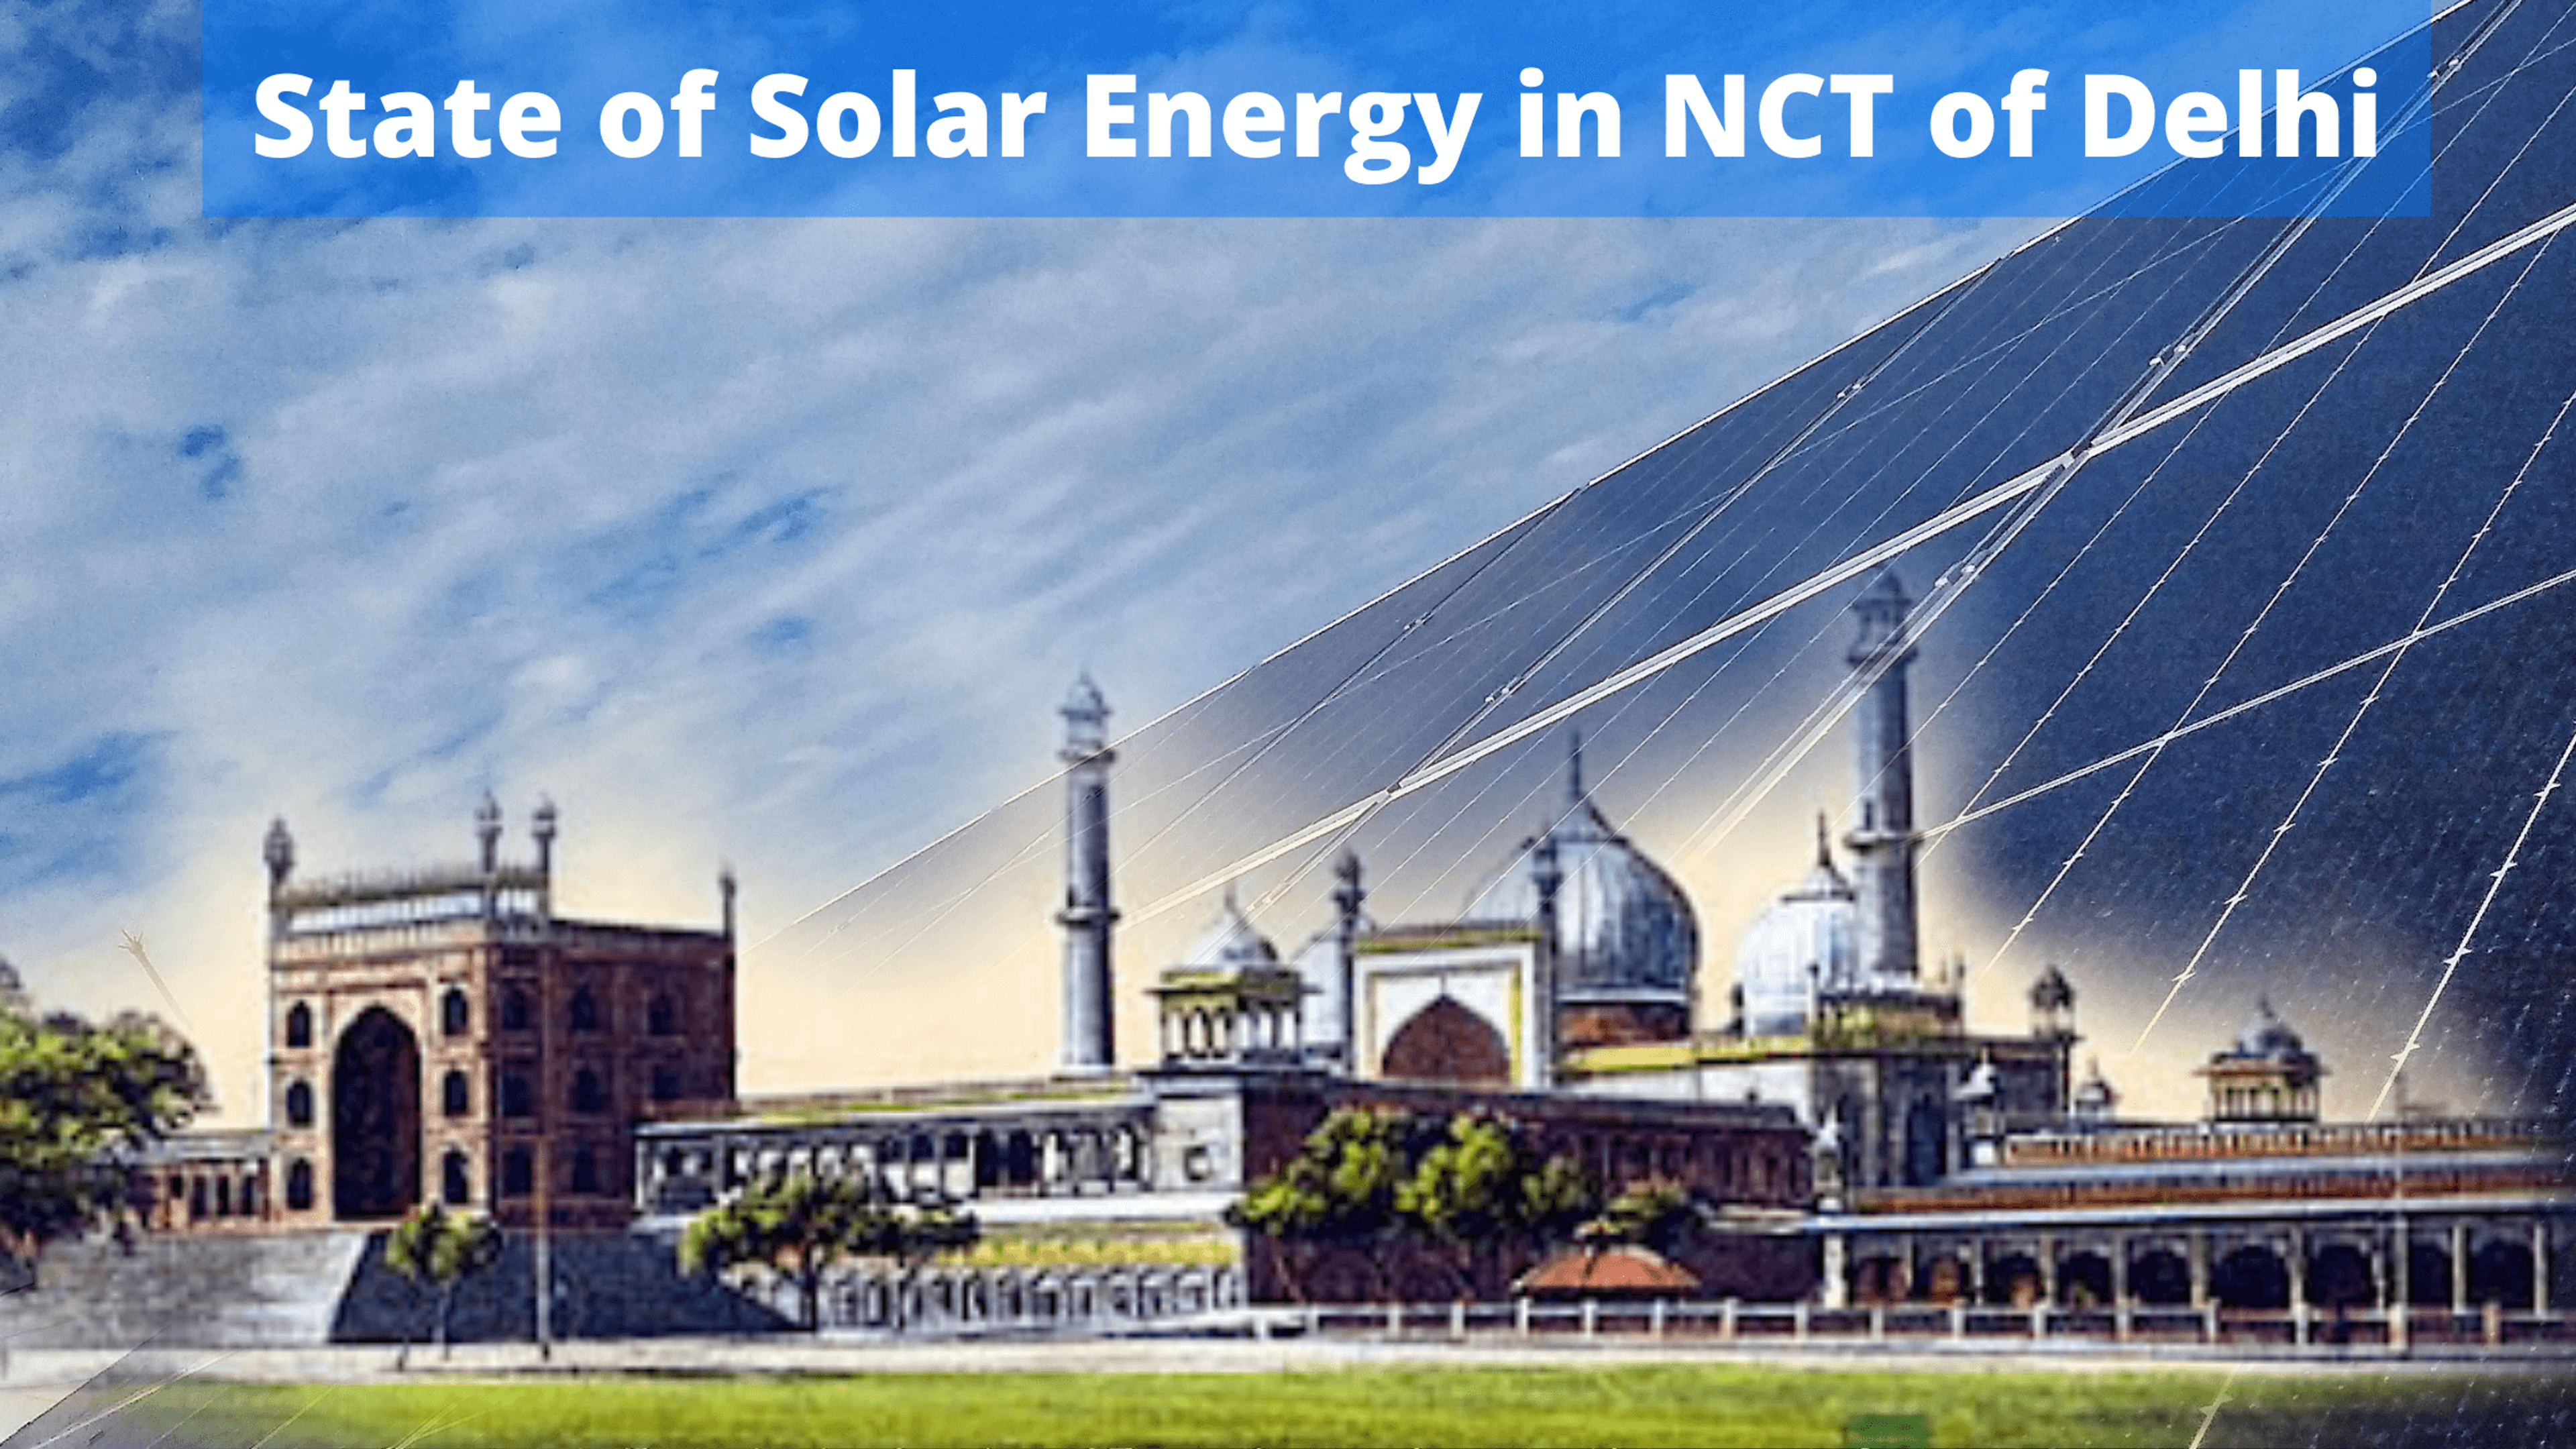 State of Solar Energy in NCT of Delhi